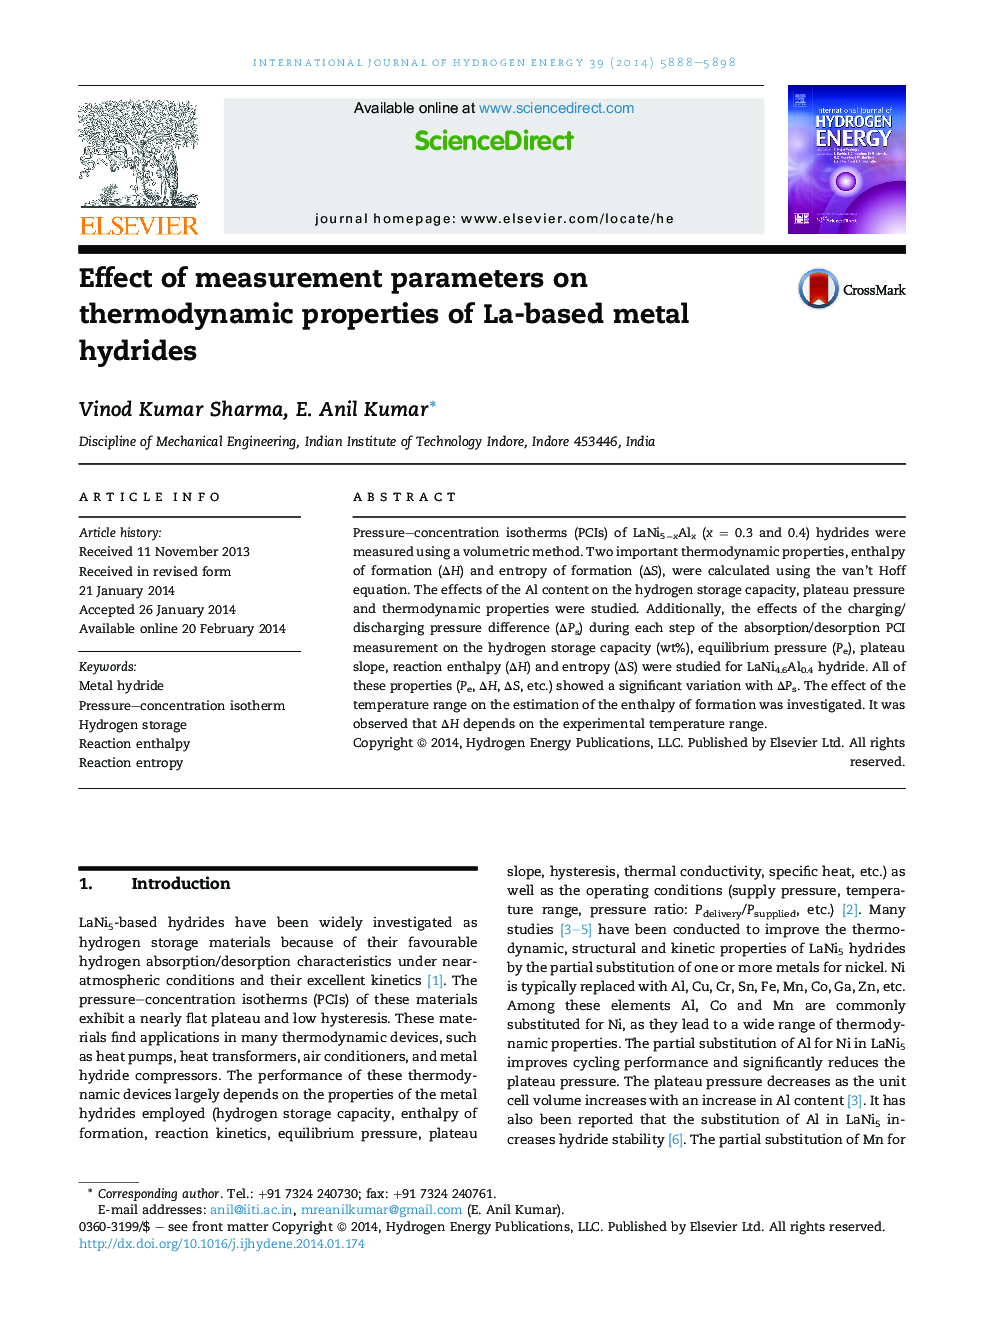 Effect of measurement parameters on thermodynamic properties of La-based metal hydrides